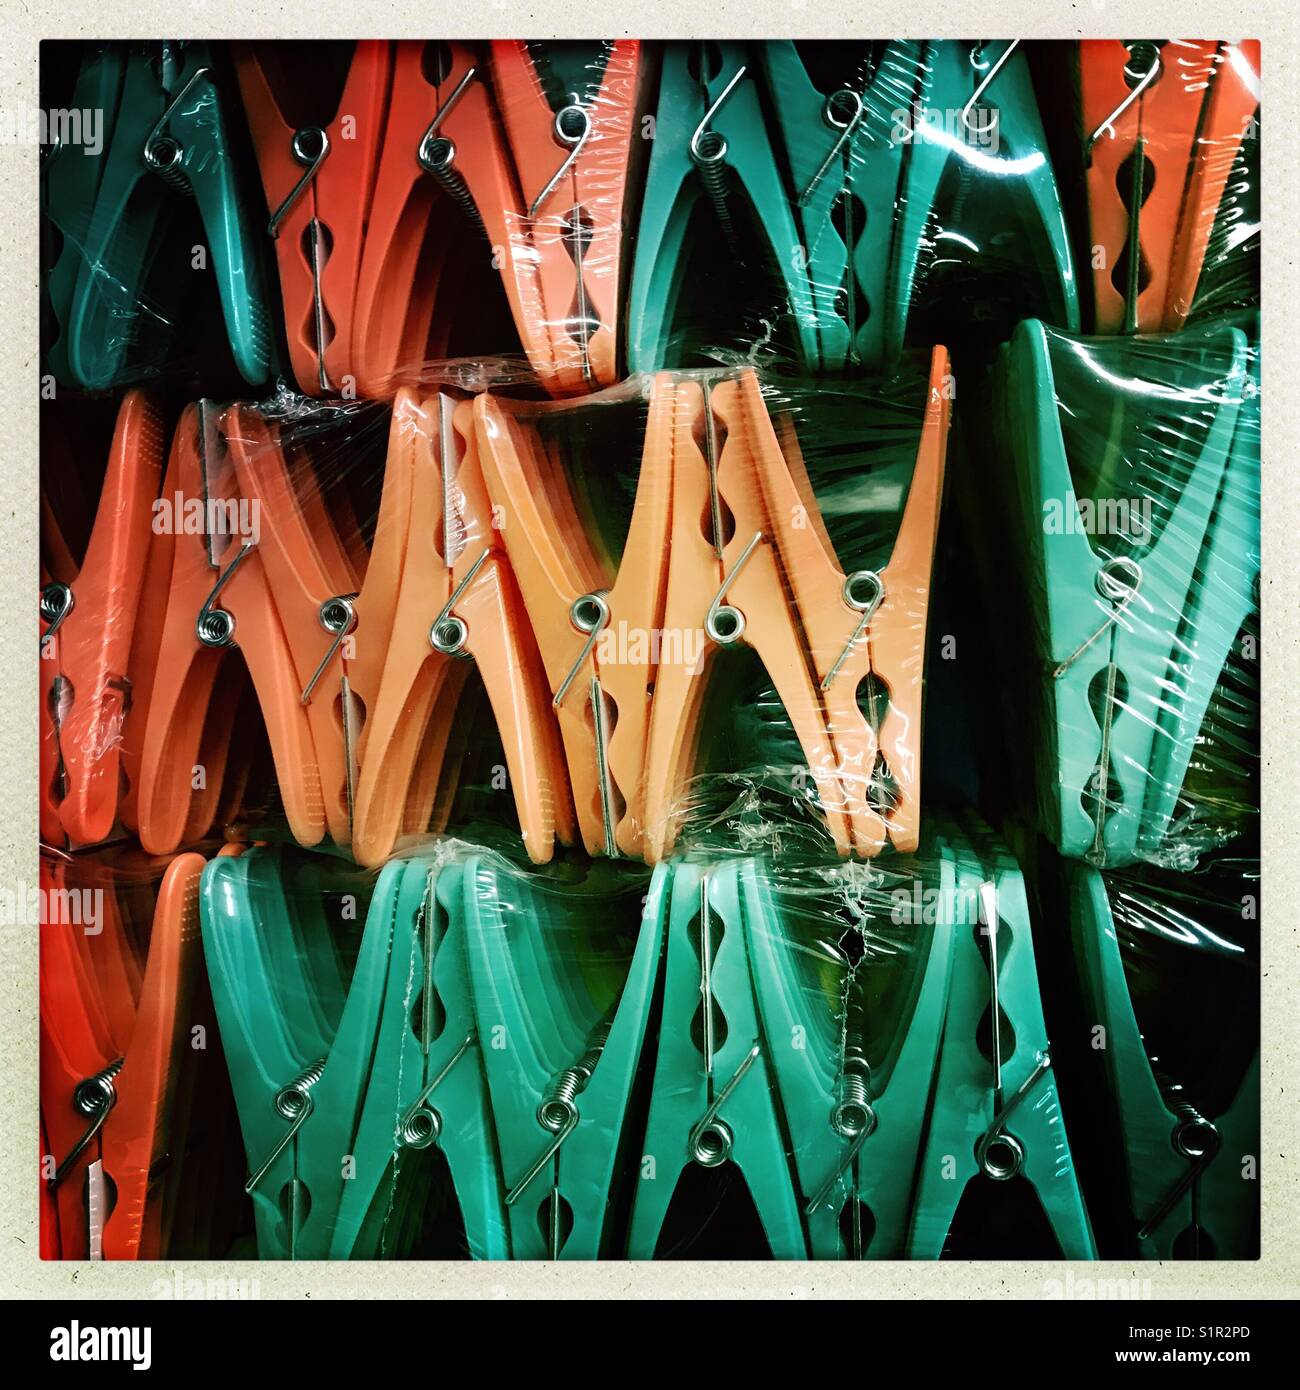 Plastic pegs lined up and ready for sale Stock Photo